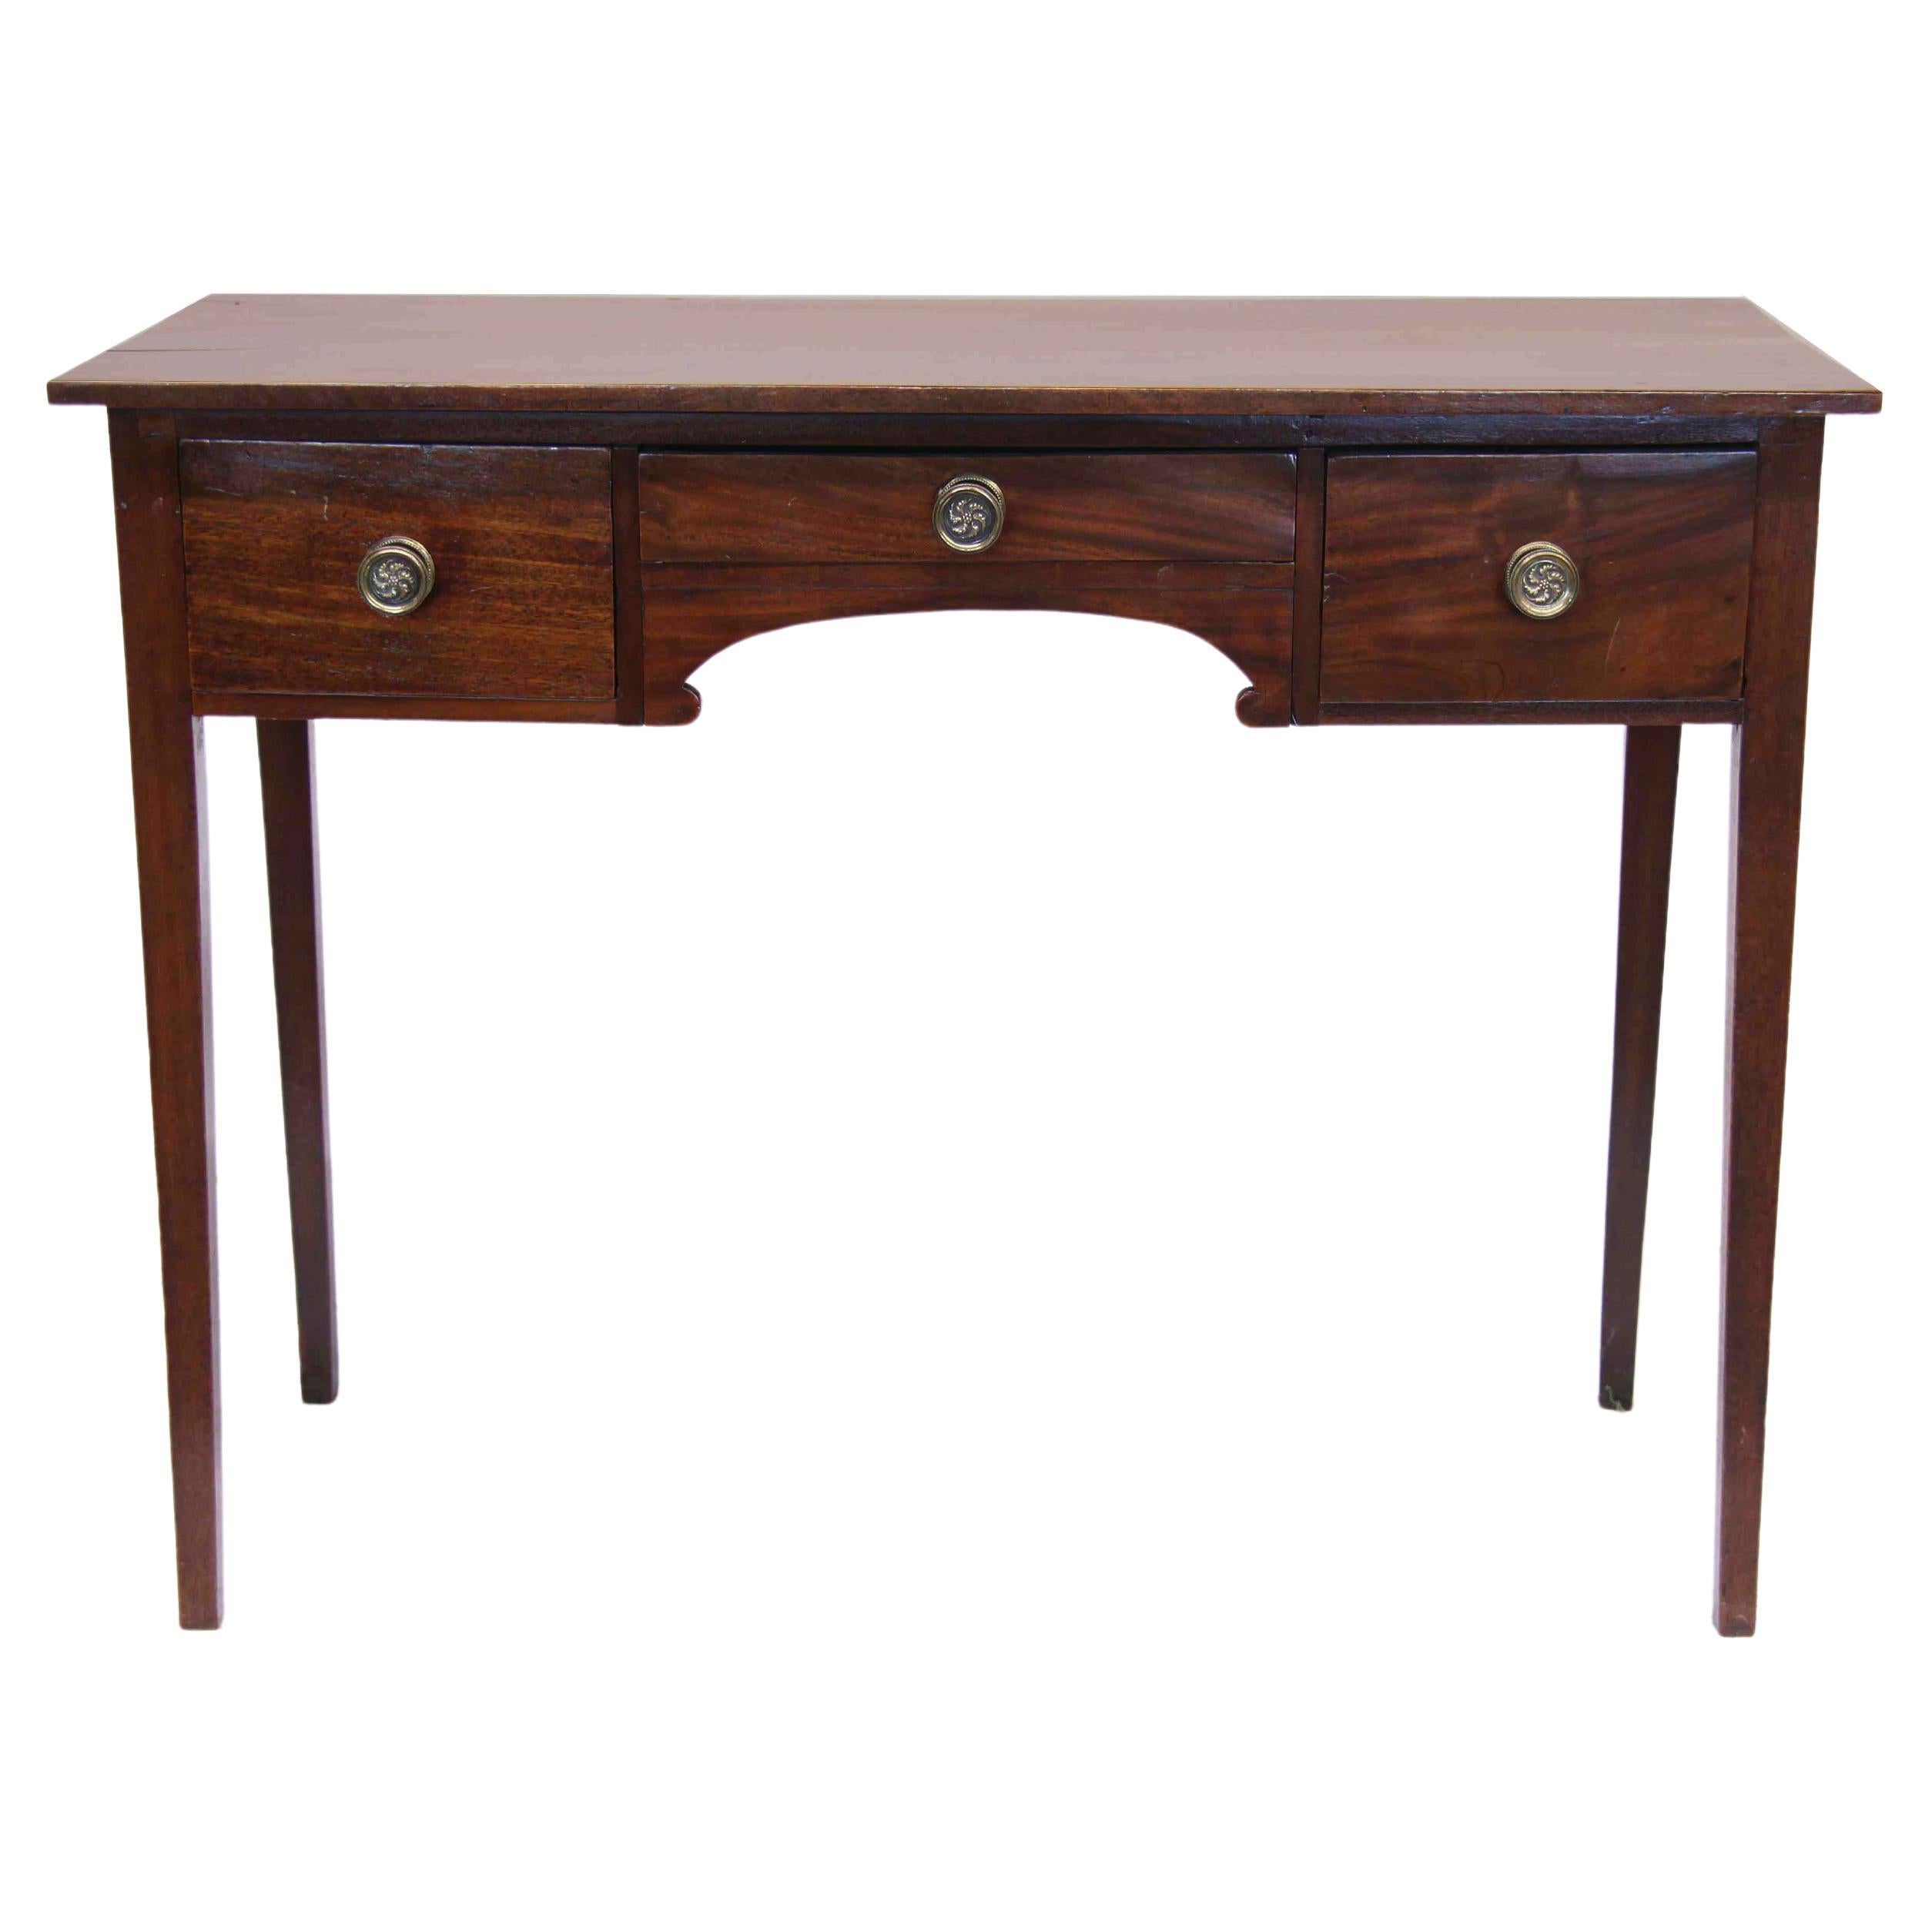 English Hepplewhite Small Sideboard For Sale